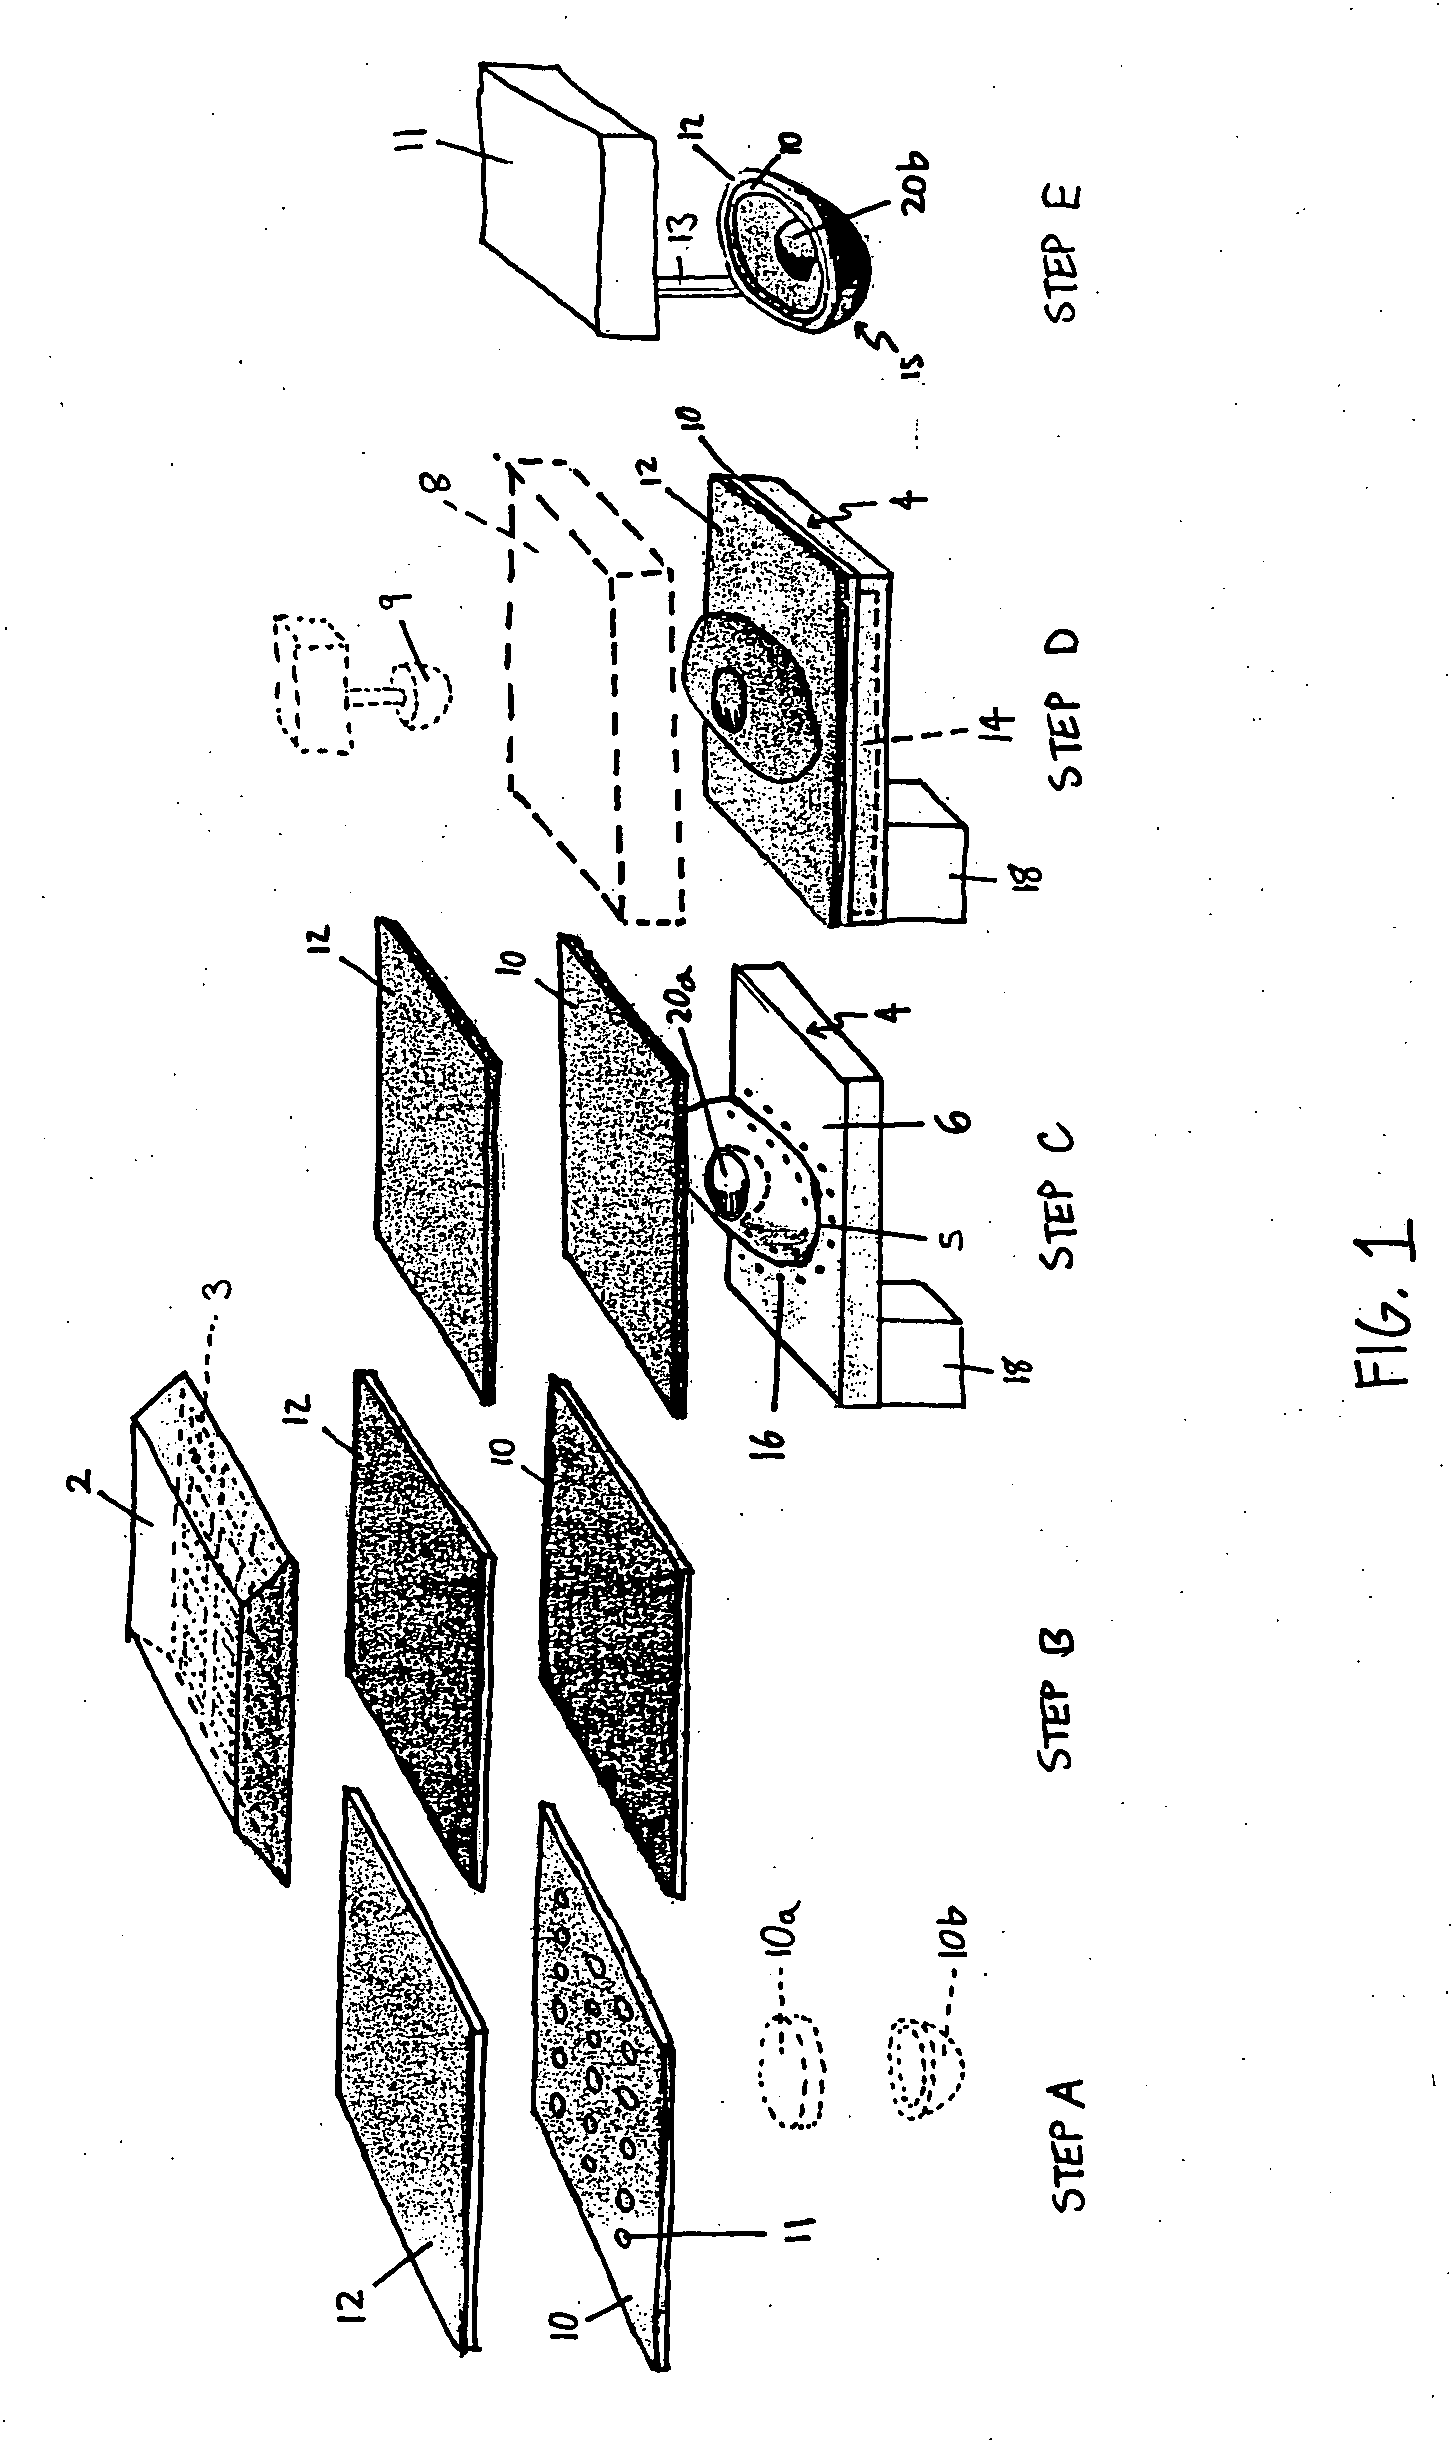 Method for forming footwear structures using thermoforming